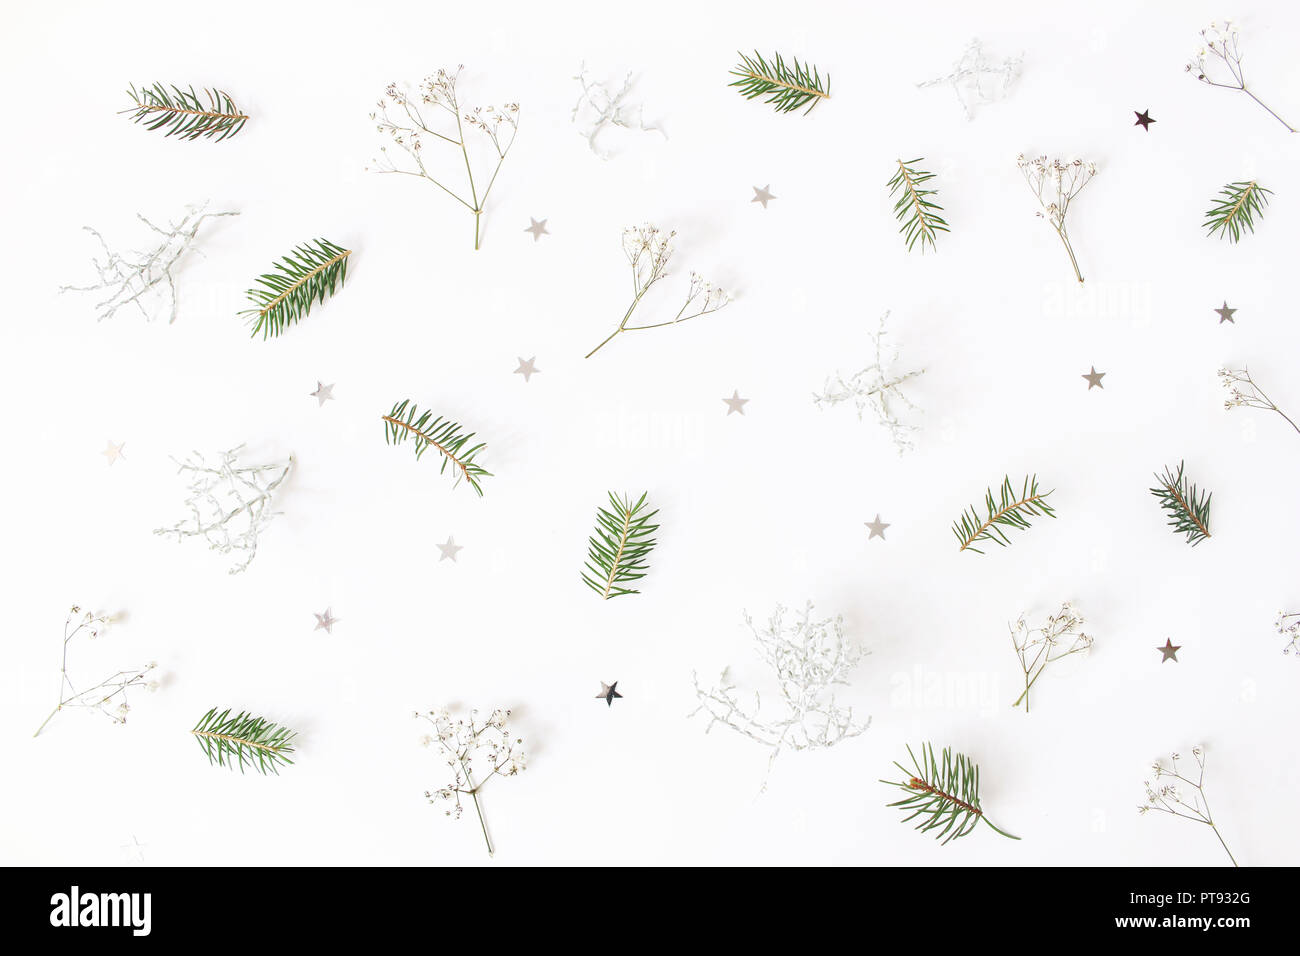 Christmas floral pattern. Winter composition of green spruce tree branches, baby's breath flowers, Calocephalus brownii and silver confetti stars on white table. Festive background. Flat lay, top view. Stock Photo